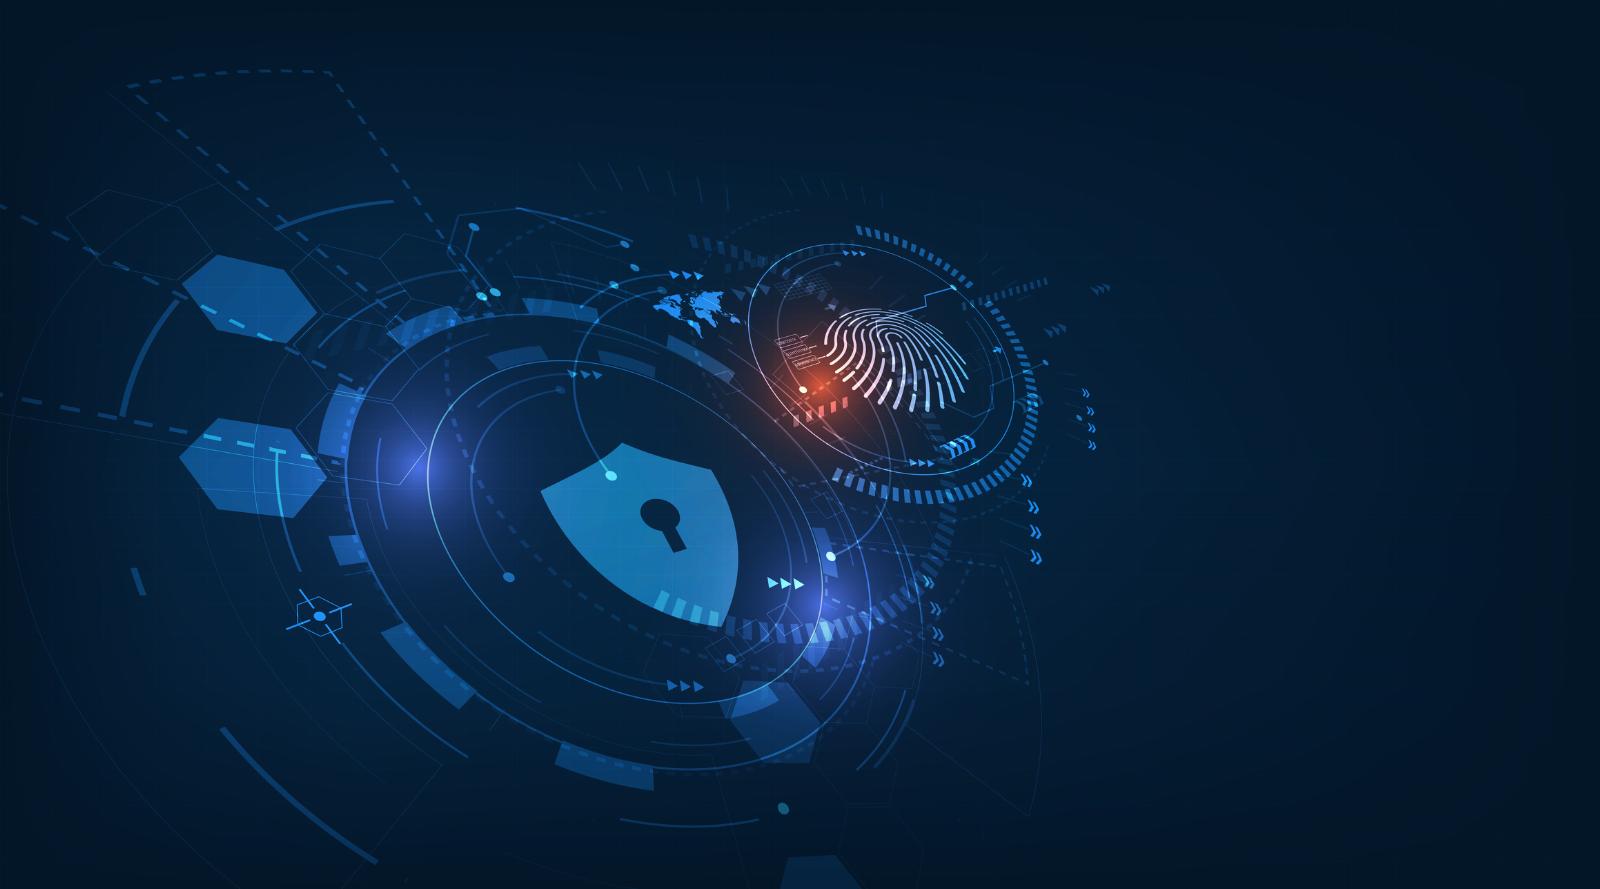 Guardz collects $18M to expand its AI-based security platform for SMBs